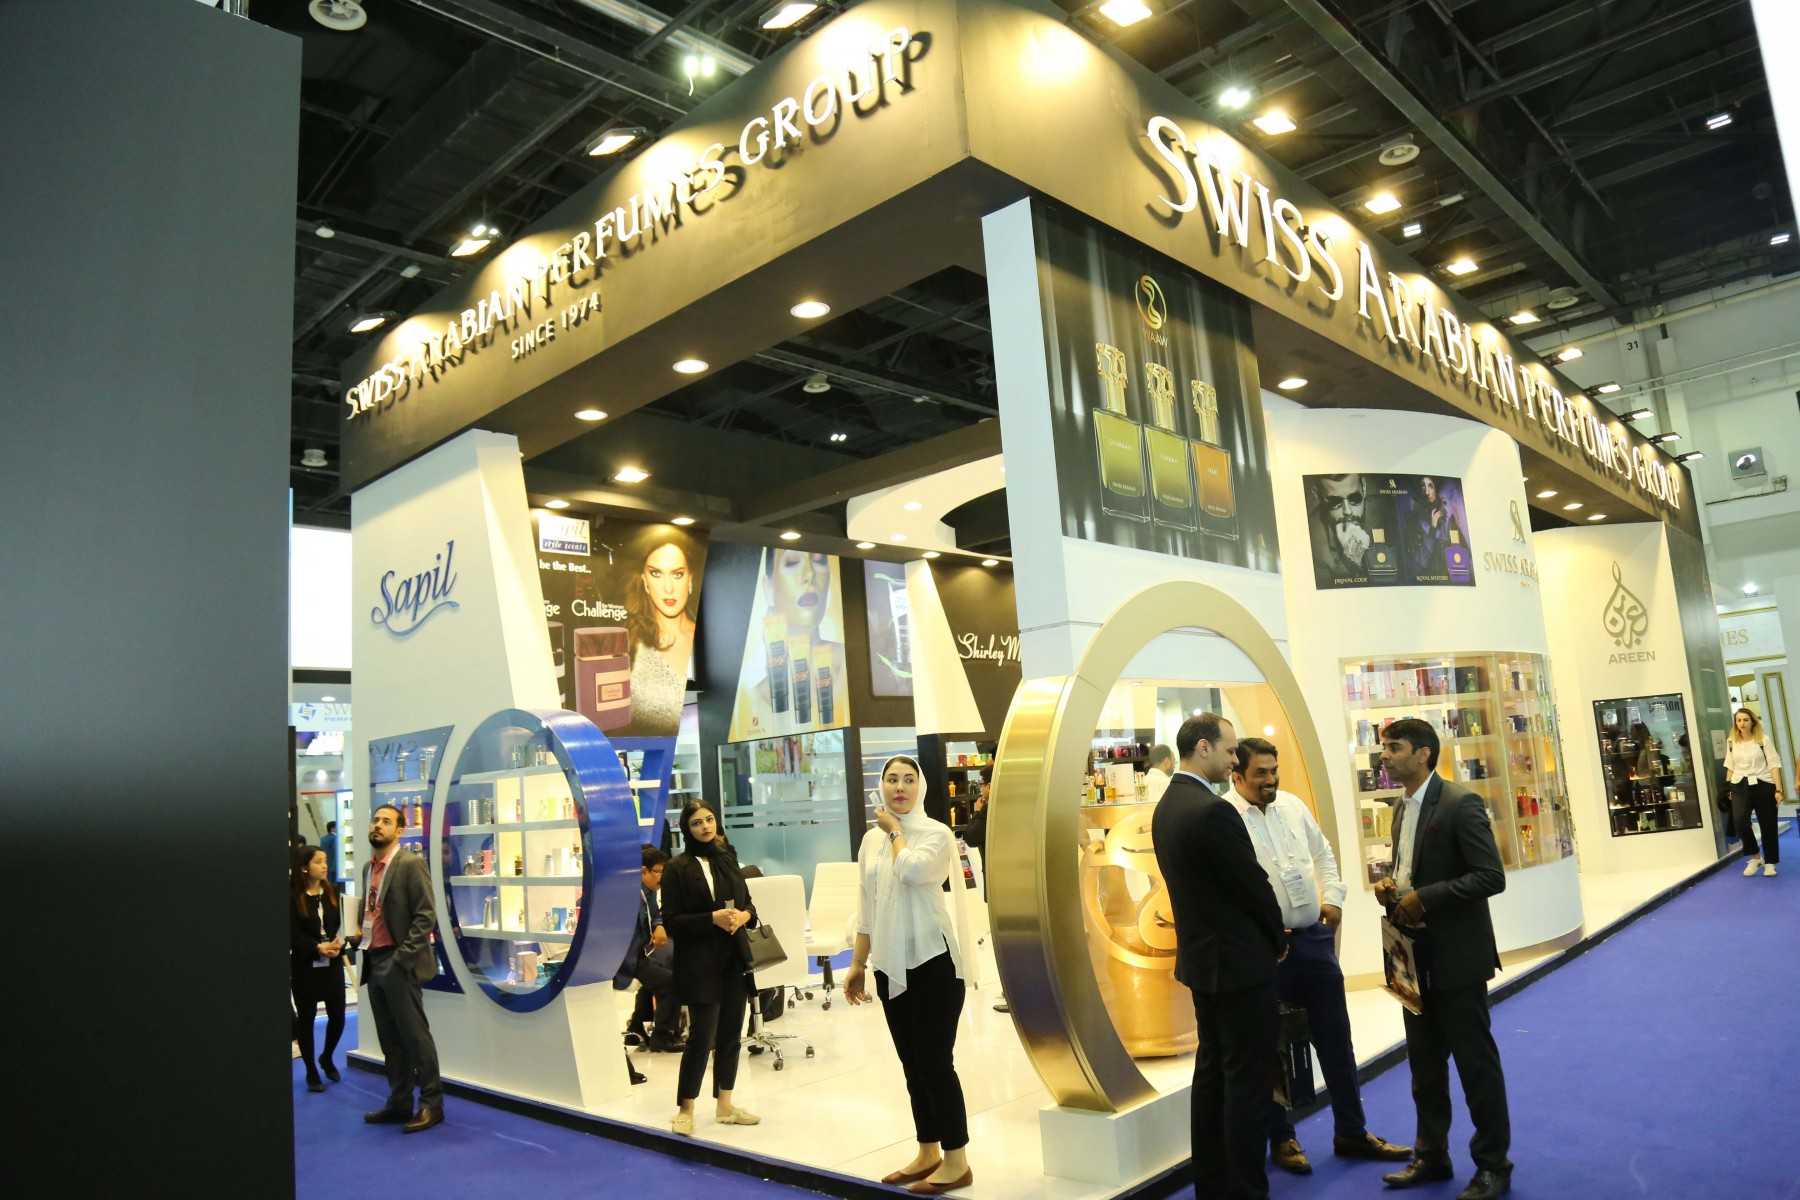 How to Control your Budget for Exhibition Show in Dubai